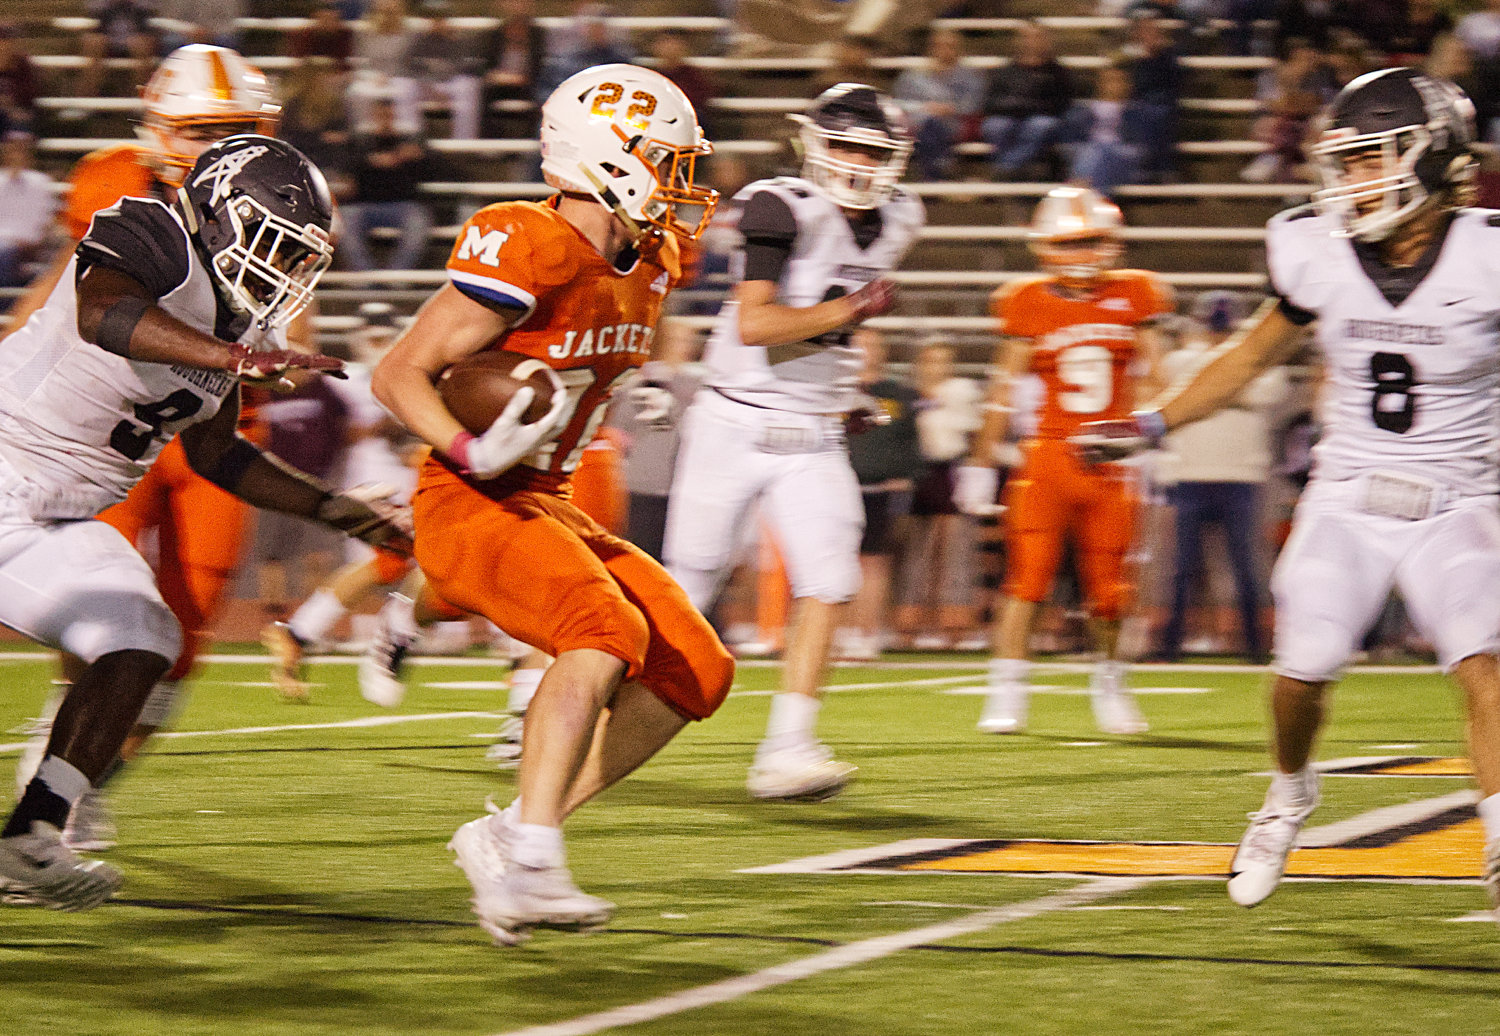 Dawson Pendergrass (22) weaves through the Roughneck defense, adding to his more than 200 yards rushing on Friday night.